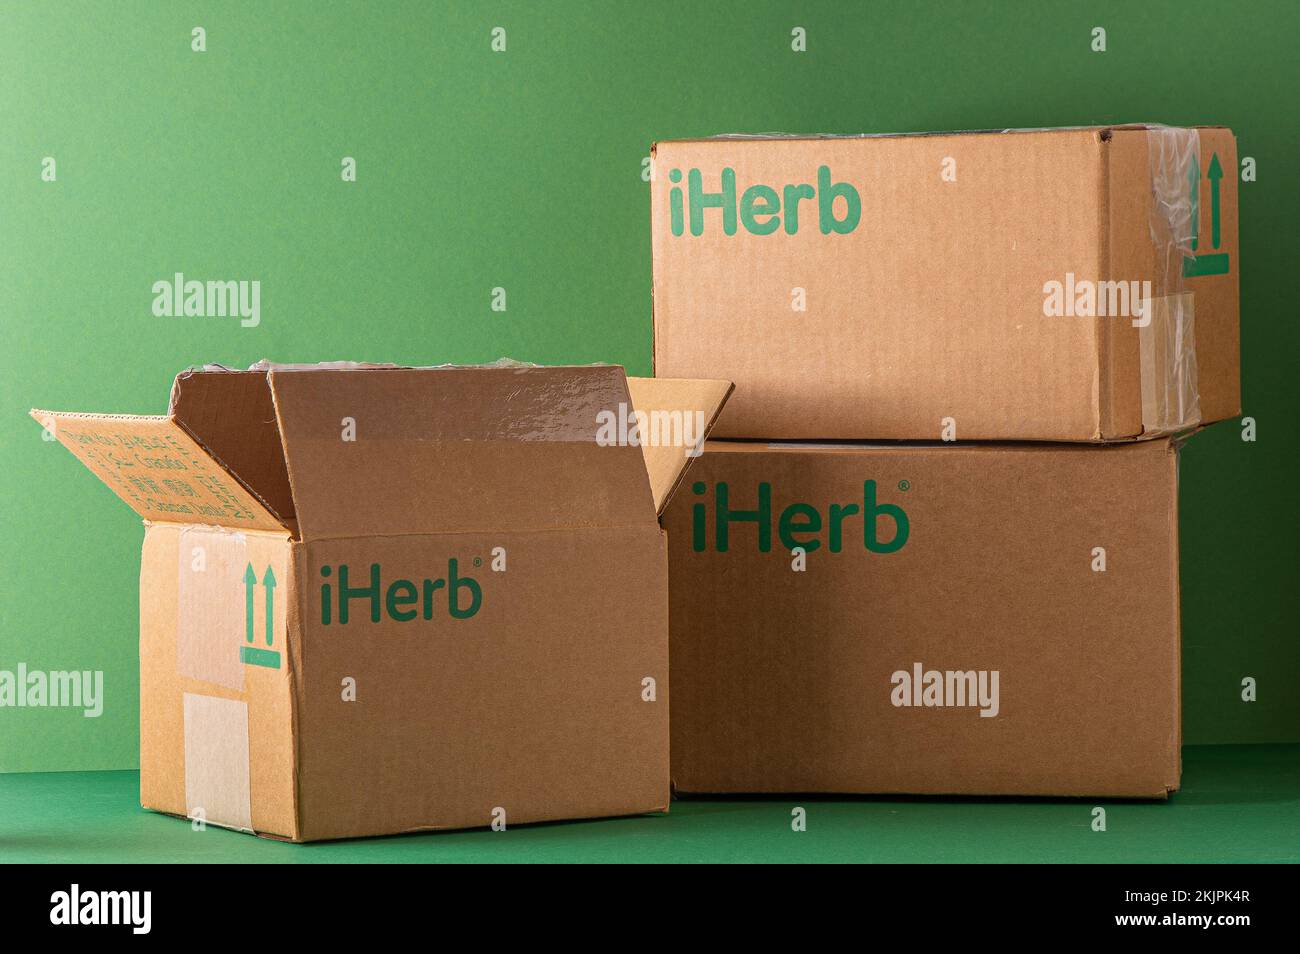 Delivery of Iherb vitamins by mail. Cardboard boxes with green logo. Open box. Shopping online for vitamin supplements. dietary supplement. Medicines for health. Kyiv, Ukraine - July 13, 2022 Stock Photo